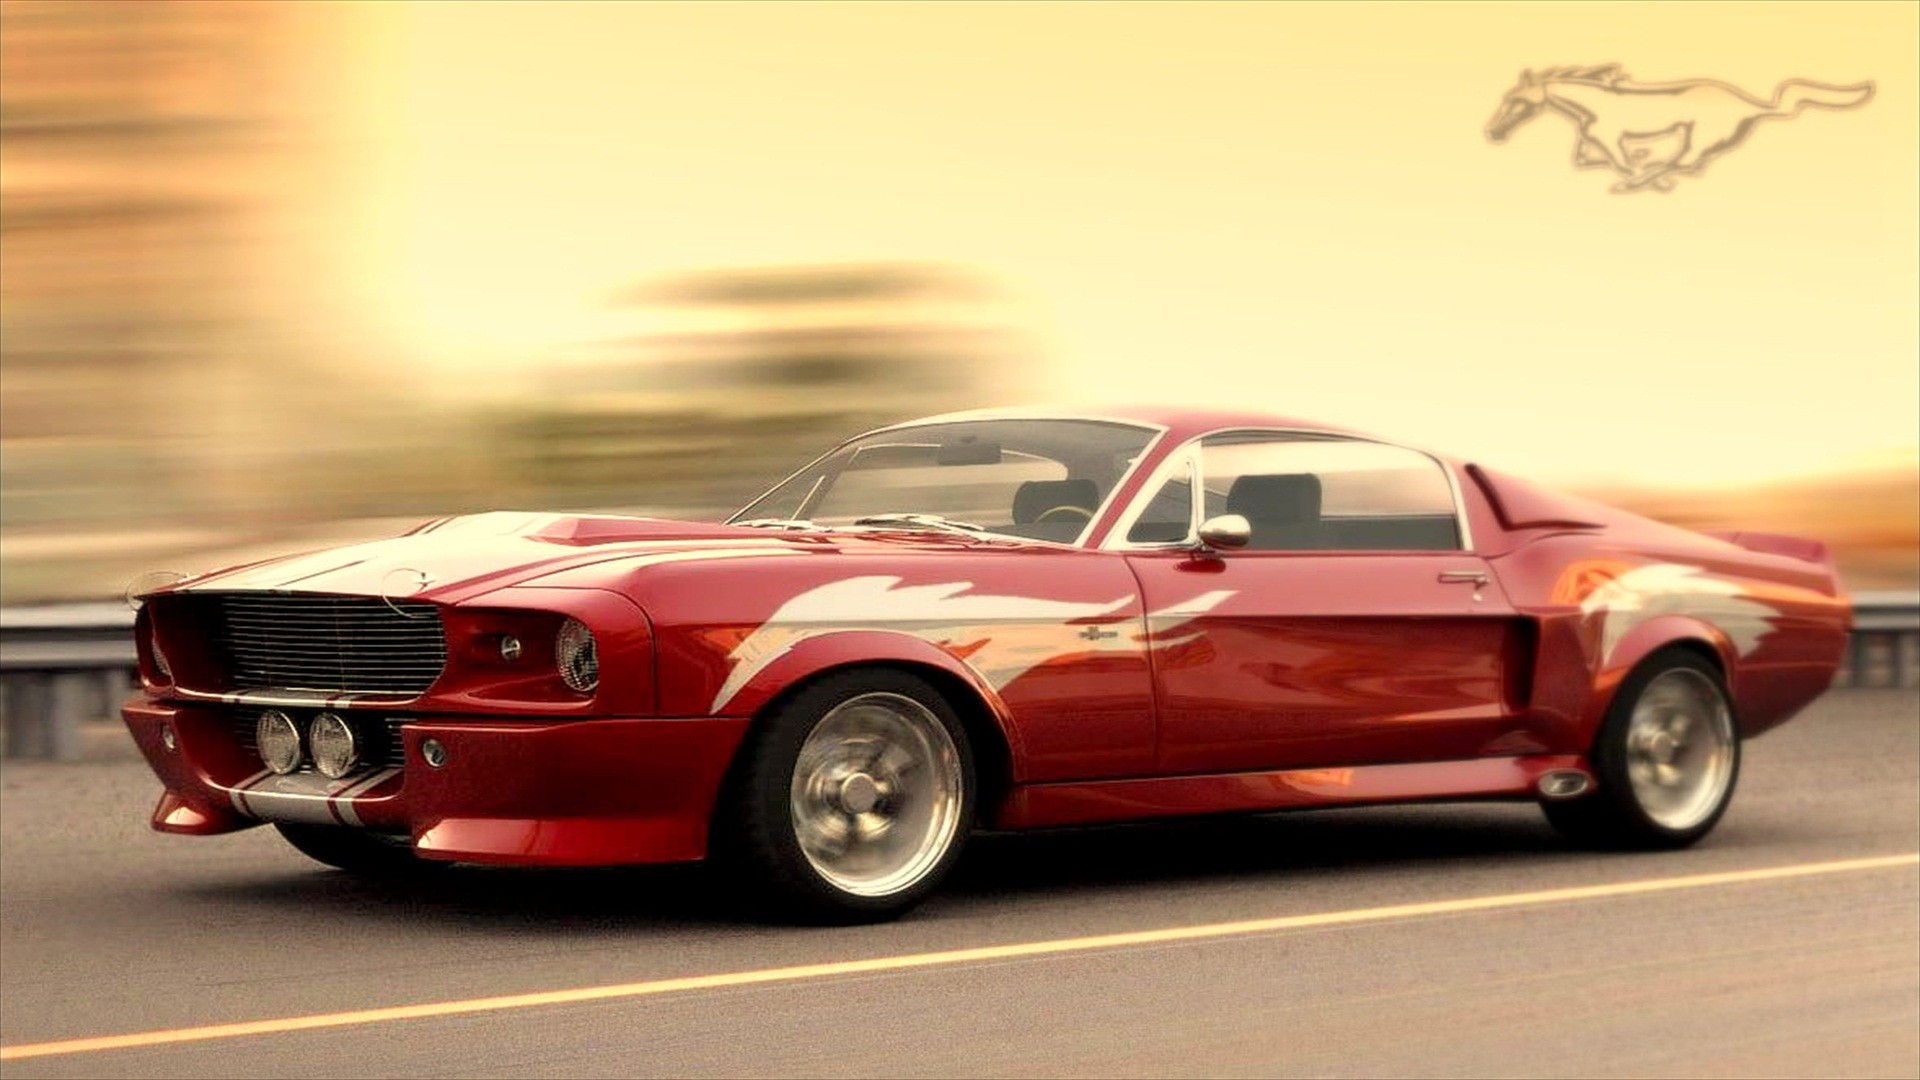 General 1920x1080 car Ford Mustang Ford red cars vehicle muscle cars American cars